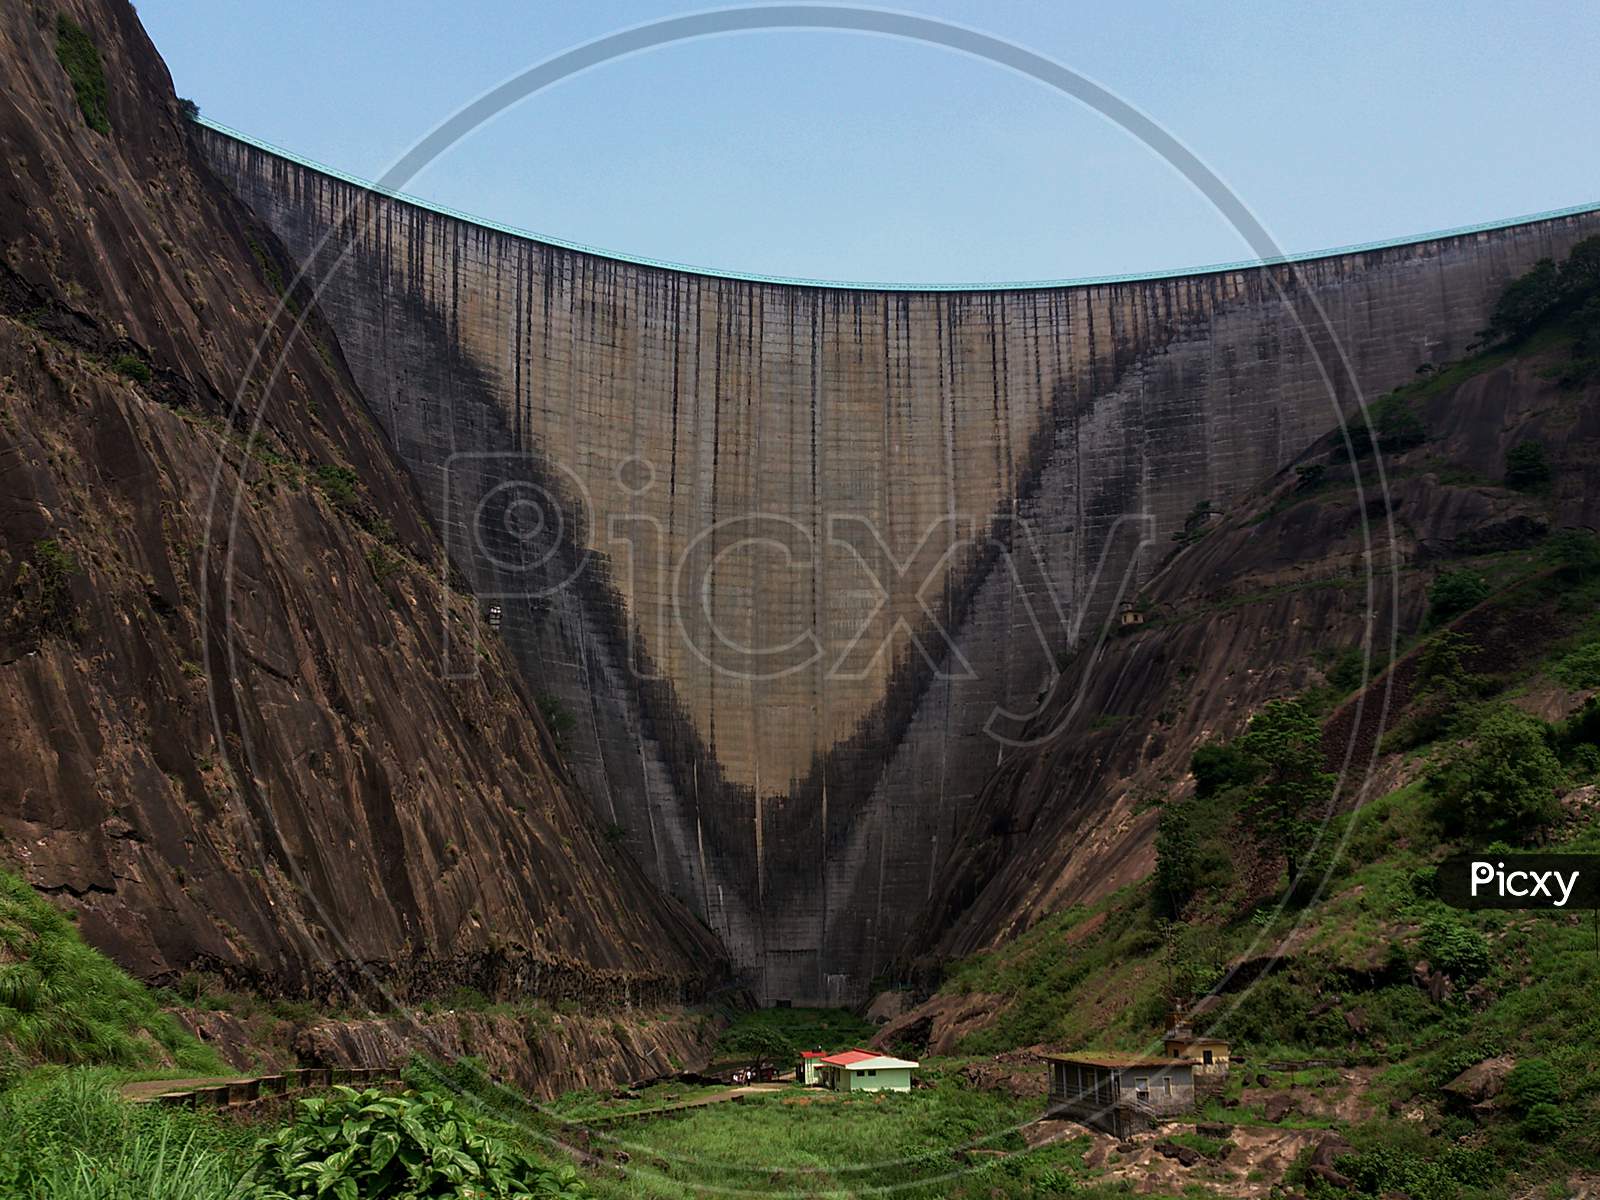 The Idukki Dam Constructed Across The Periyar River In A Narrow Gorge Between Two Granite Hills In Kerala, India